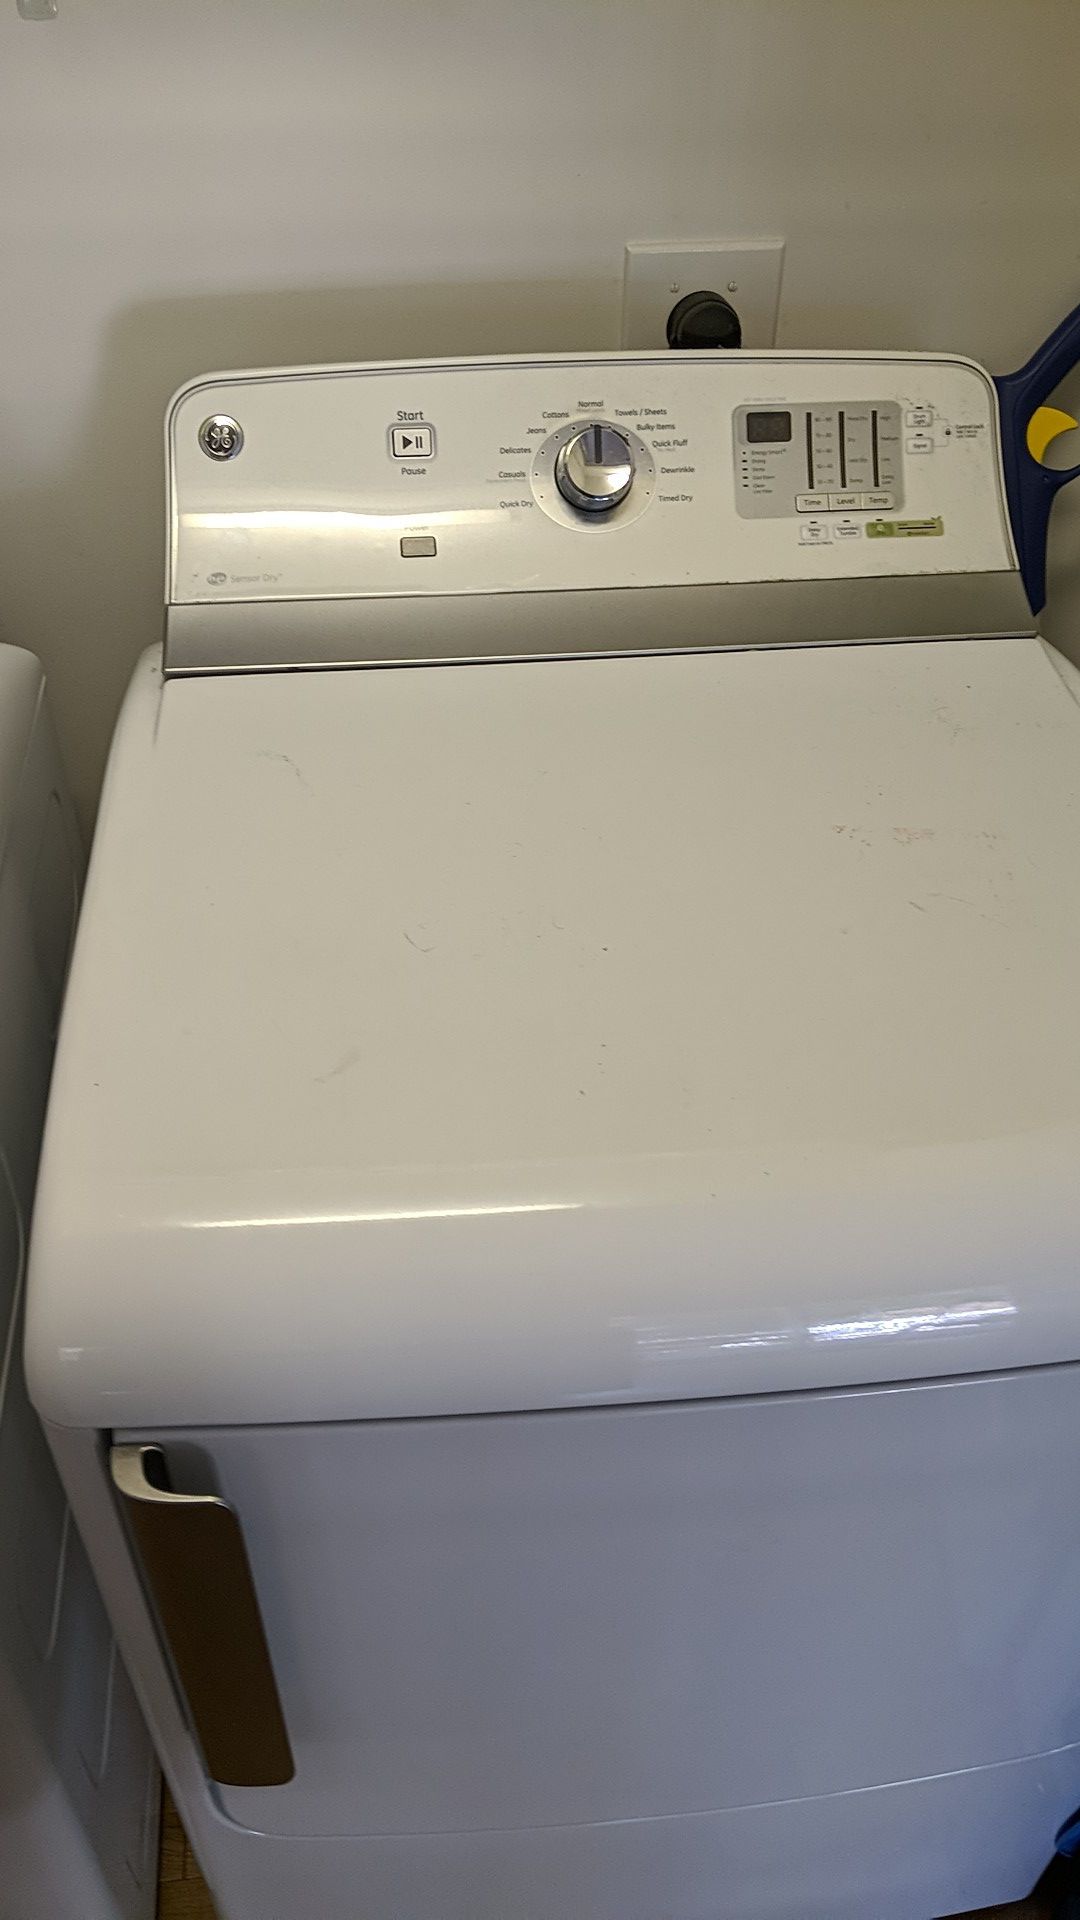 GE Washer/Dryer combo set. In excellent condition